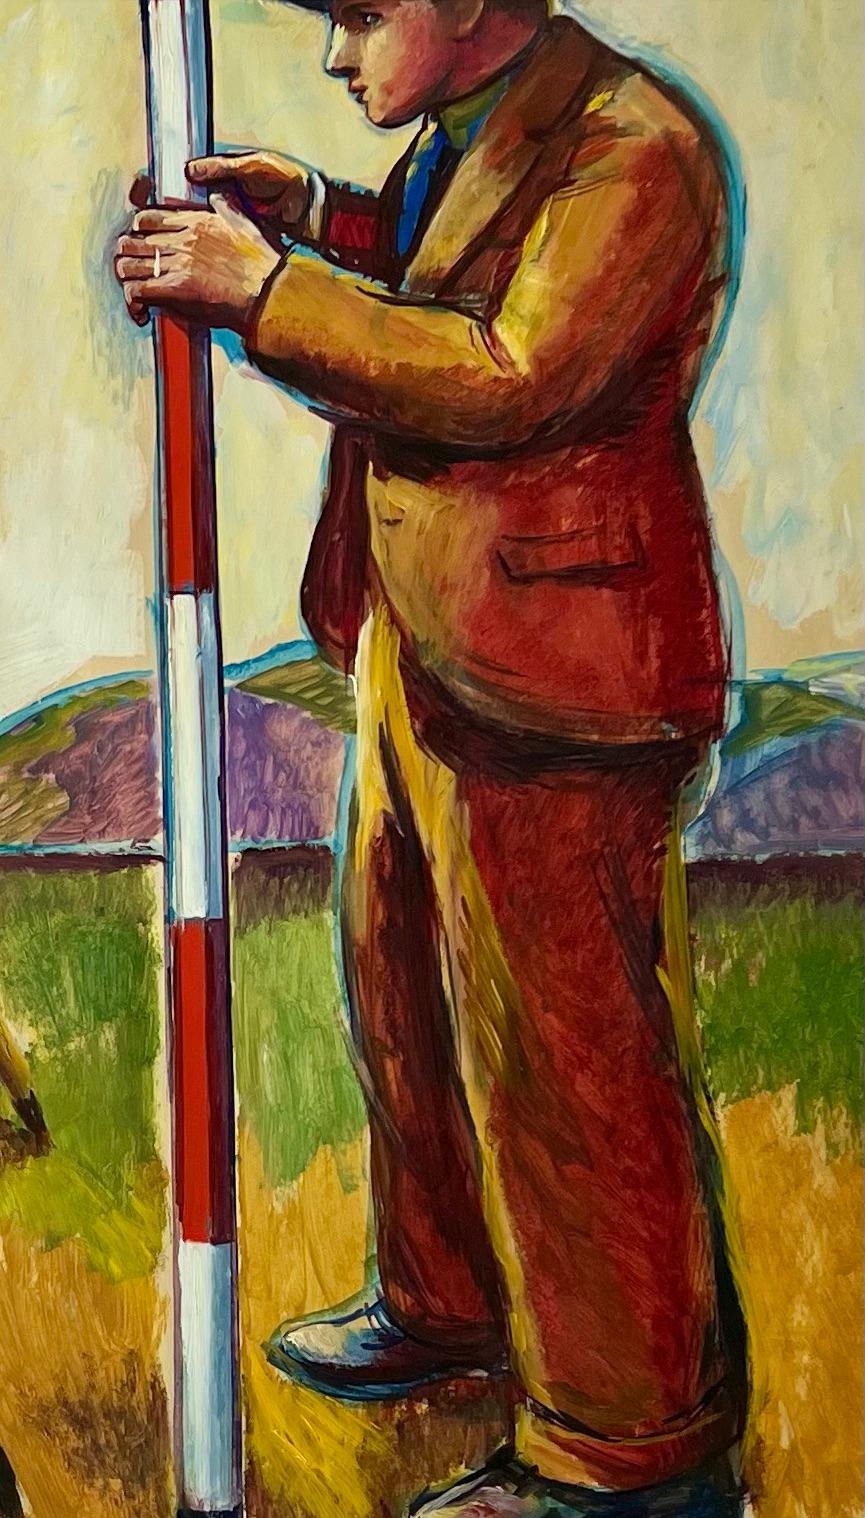 Surveyors WPA American Scene Mid 20th Century Modern Social Realism Men Working

Jo Cain (1904 - 2003)
Surveyors
30 ½ x 40 ¼ inches (sight)
Gouache on paper c. 1930s
Signed lower right covered by mat
Estate stamp verso
39 x 49 inches framed

The